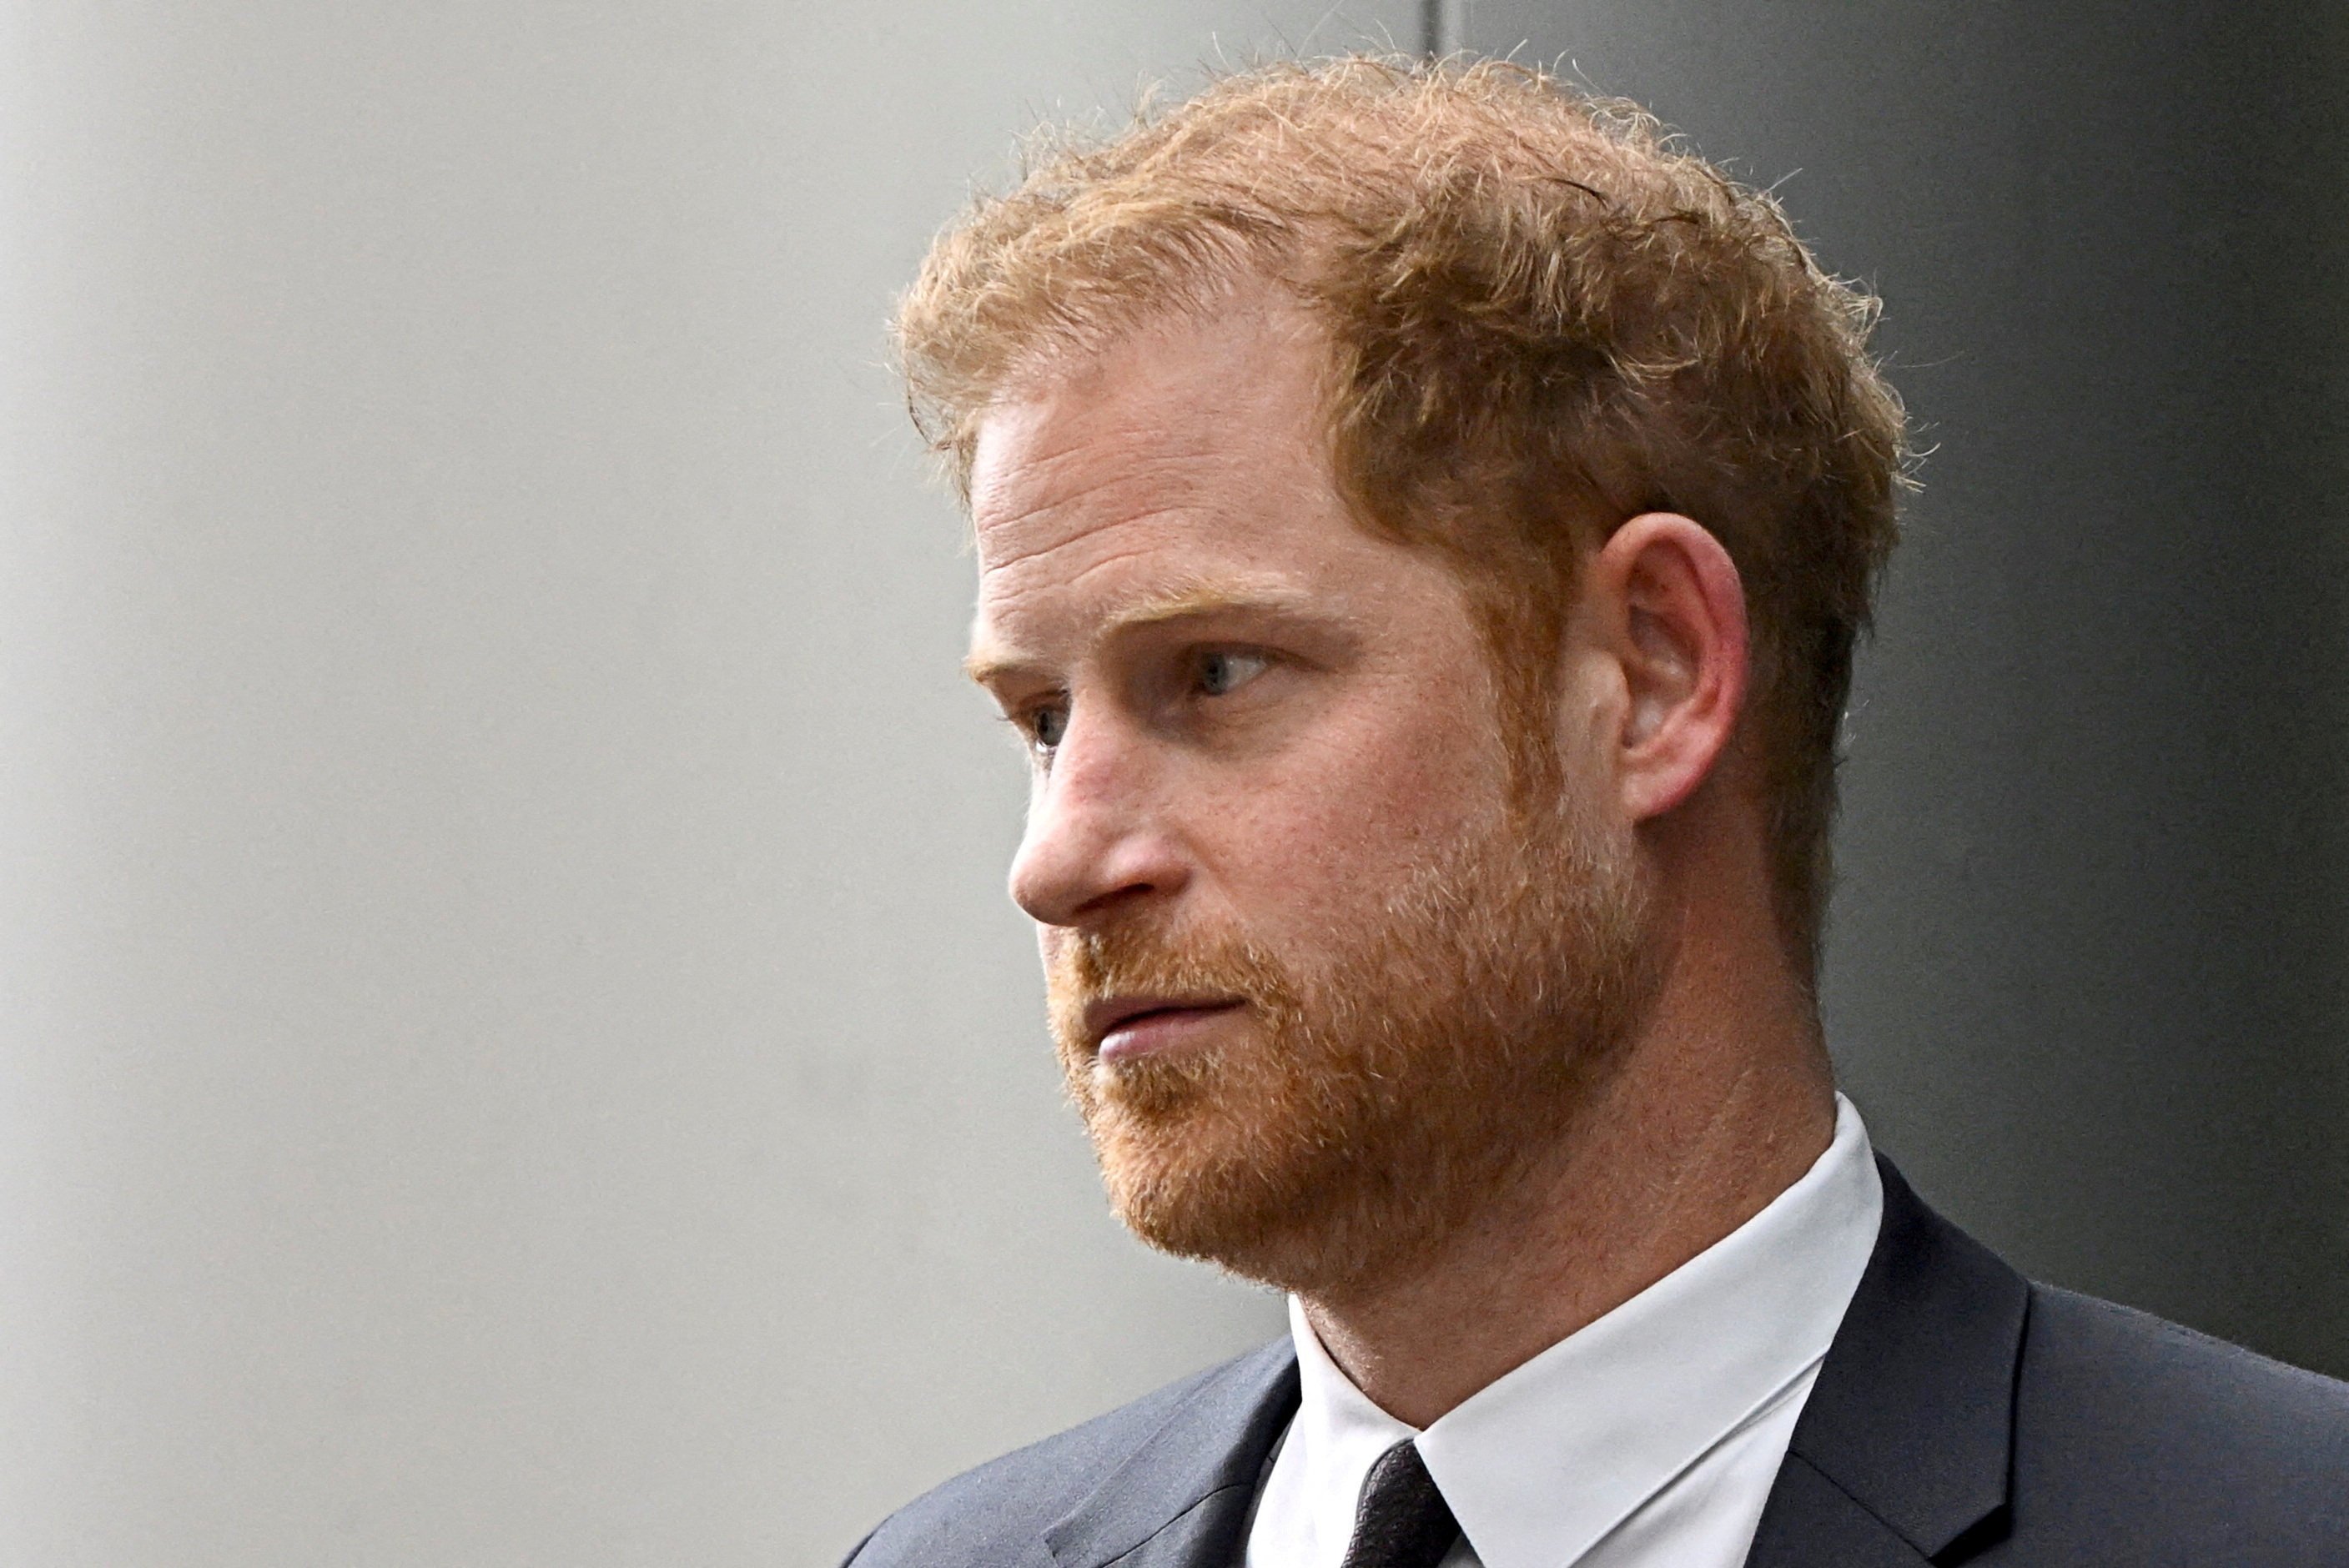 Prince Harry was not improperly stripped of his publicly funded security detail during visits to Britain after he gave up his status as a working member of the royal family and moved to the U.S., a London judge ruled on Wednesday. Photo: Reuters